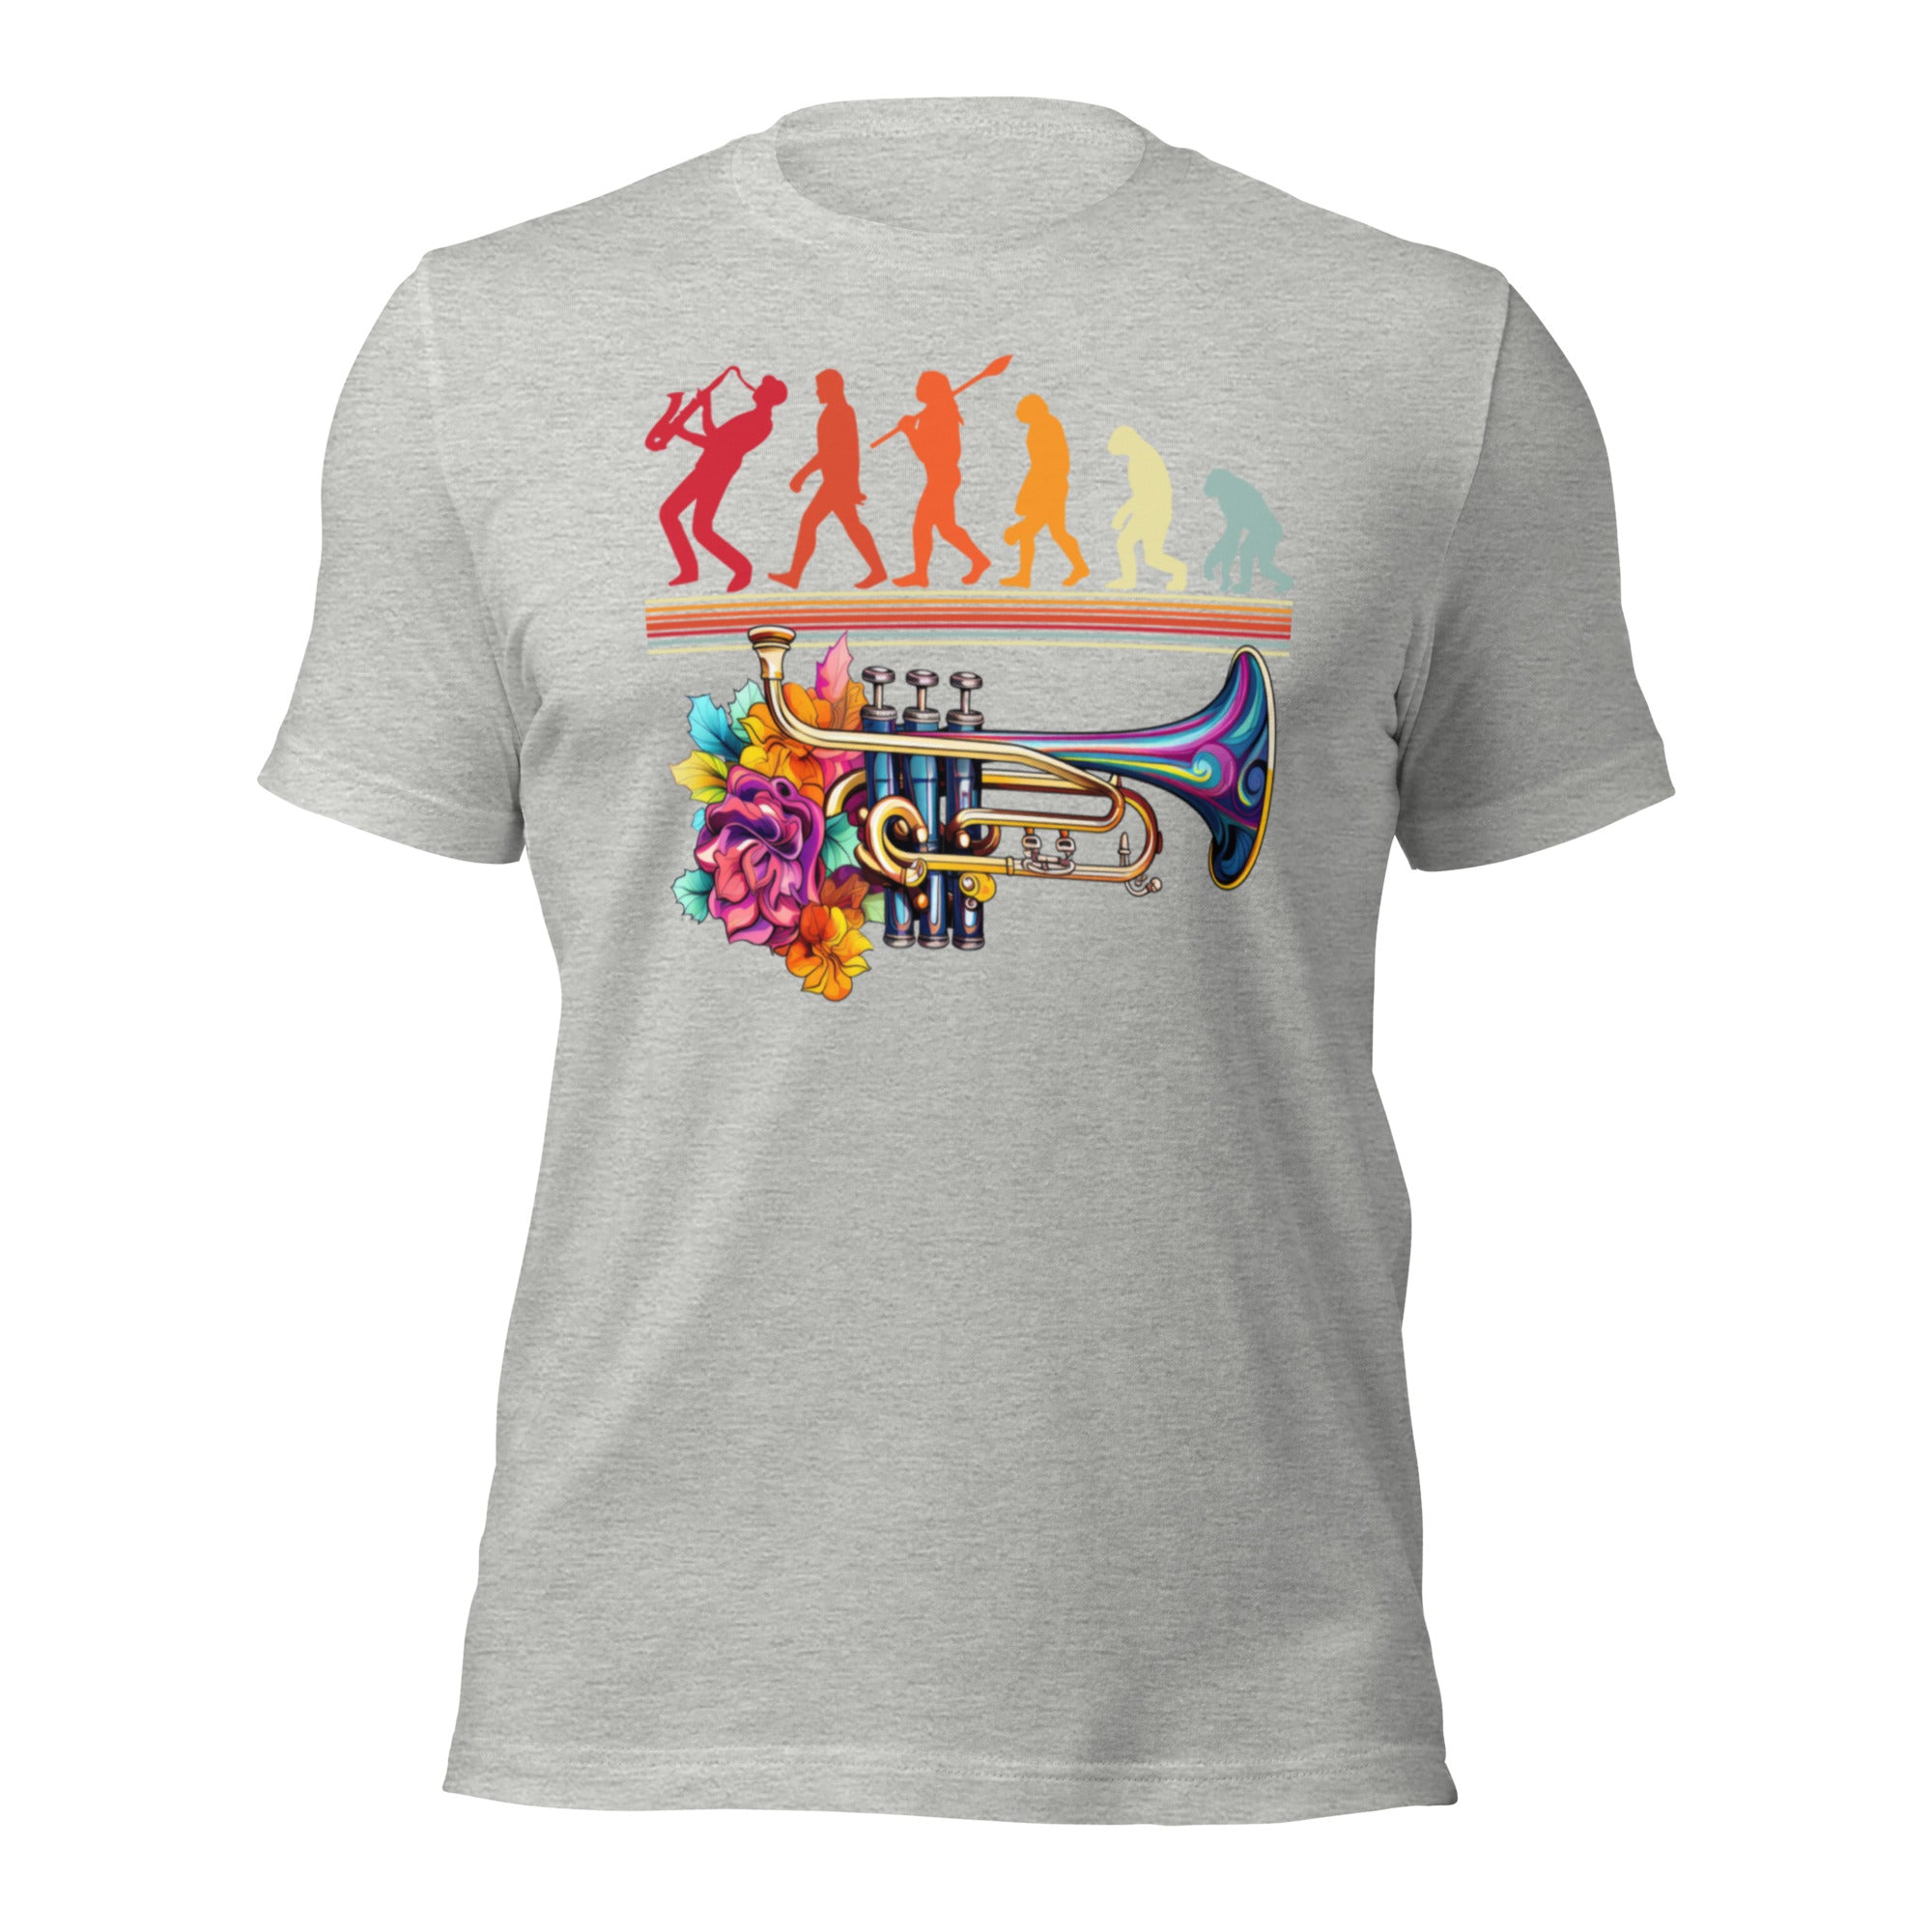 Unisex t-shirt, Music Lovers, Back to School, everyday T shirt